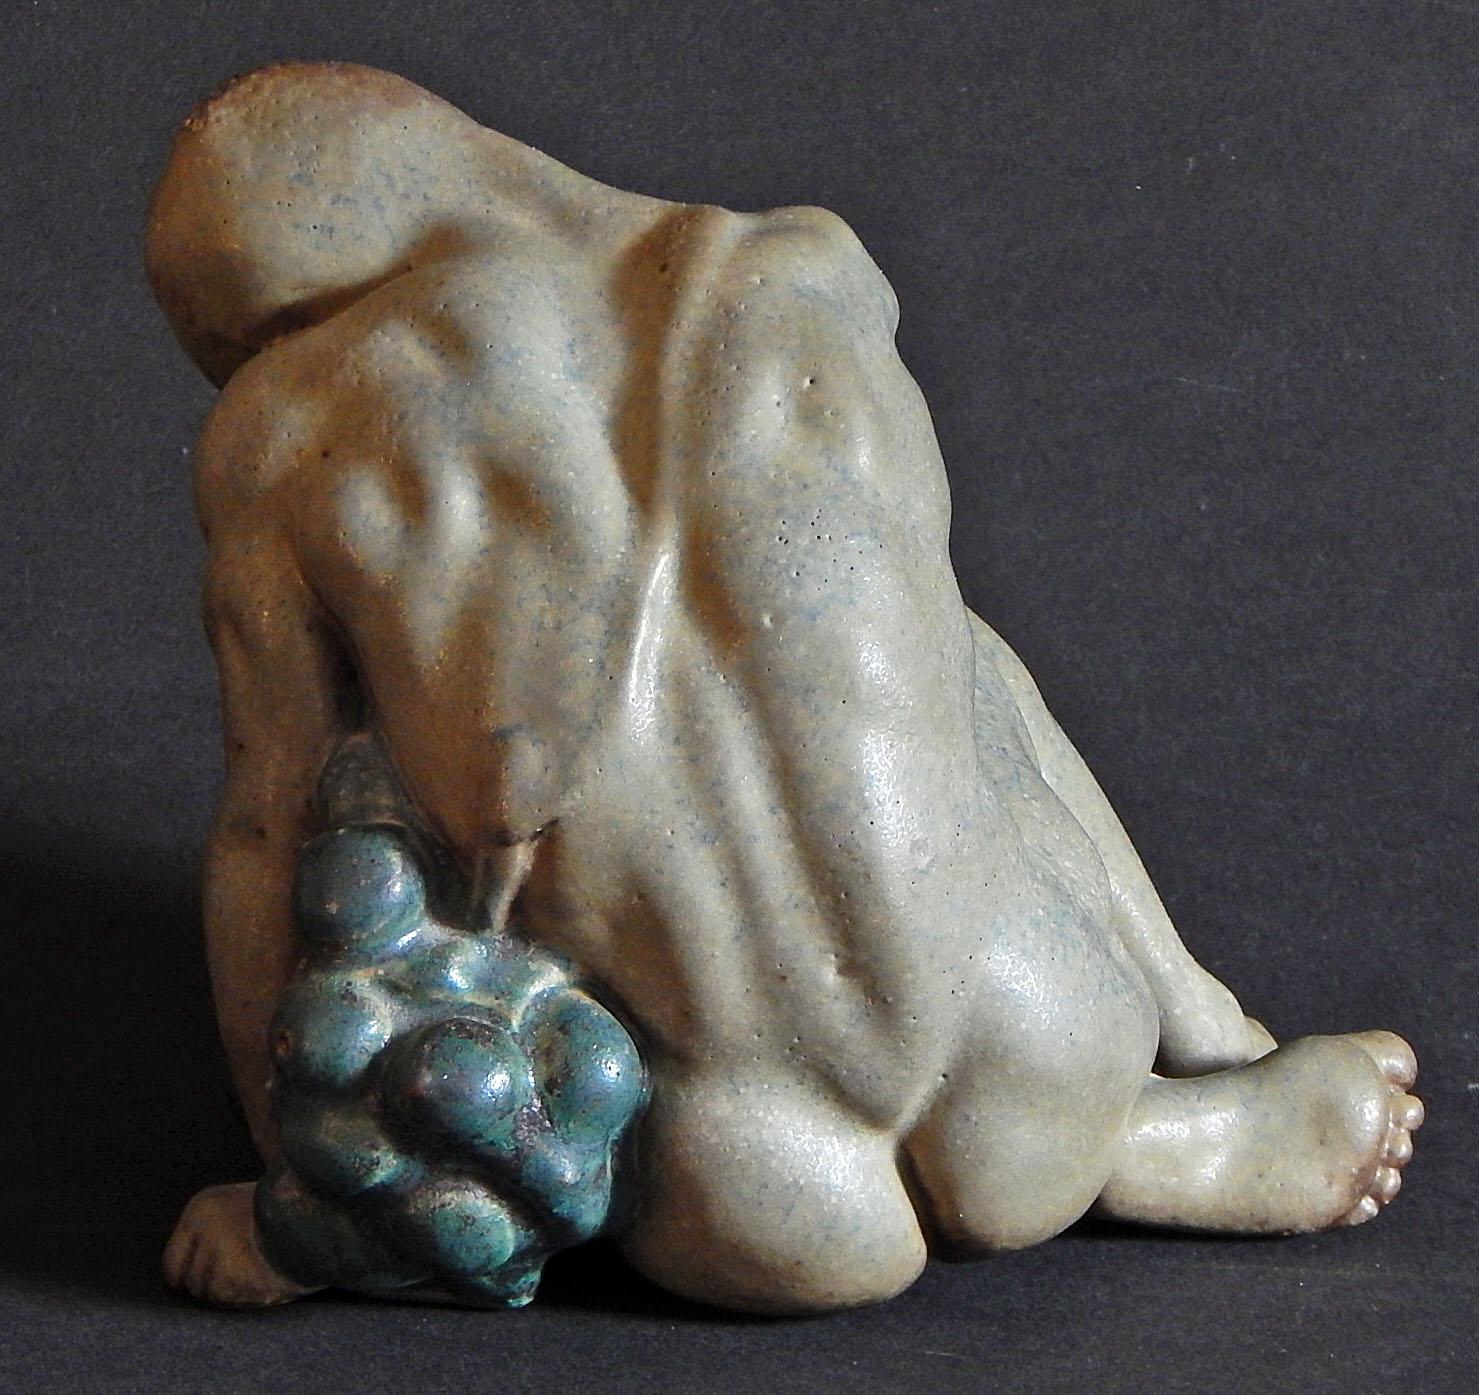 This sensuous ceramic piece depicts a beautifully sculpted nude figure embracing an exaggerated grape cluster, sculpted by Kai Nielsen for Bing & Grondahl in Copenhagen. While all examples of this piece are rare, the glazes here are especially